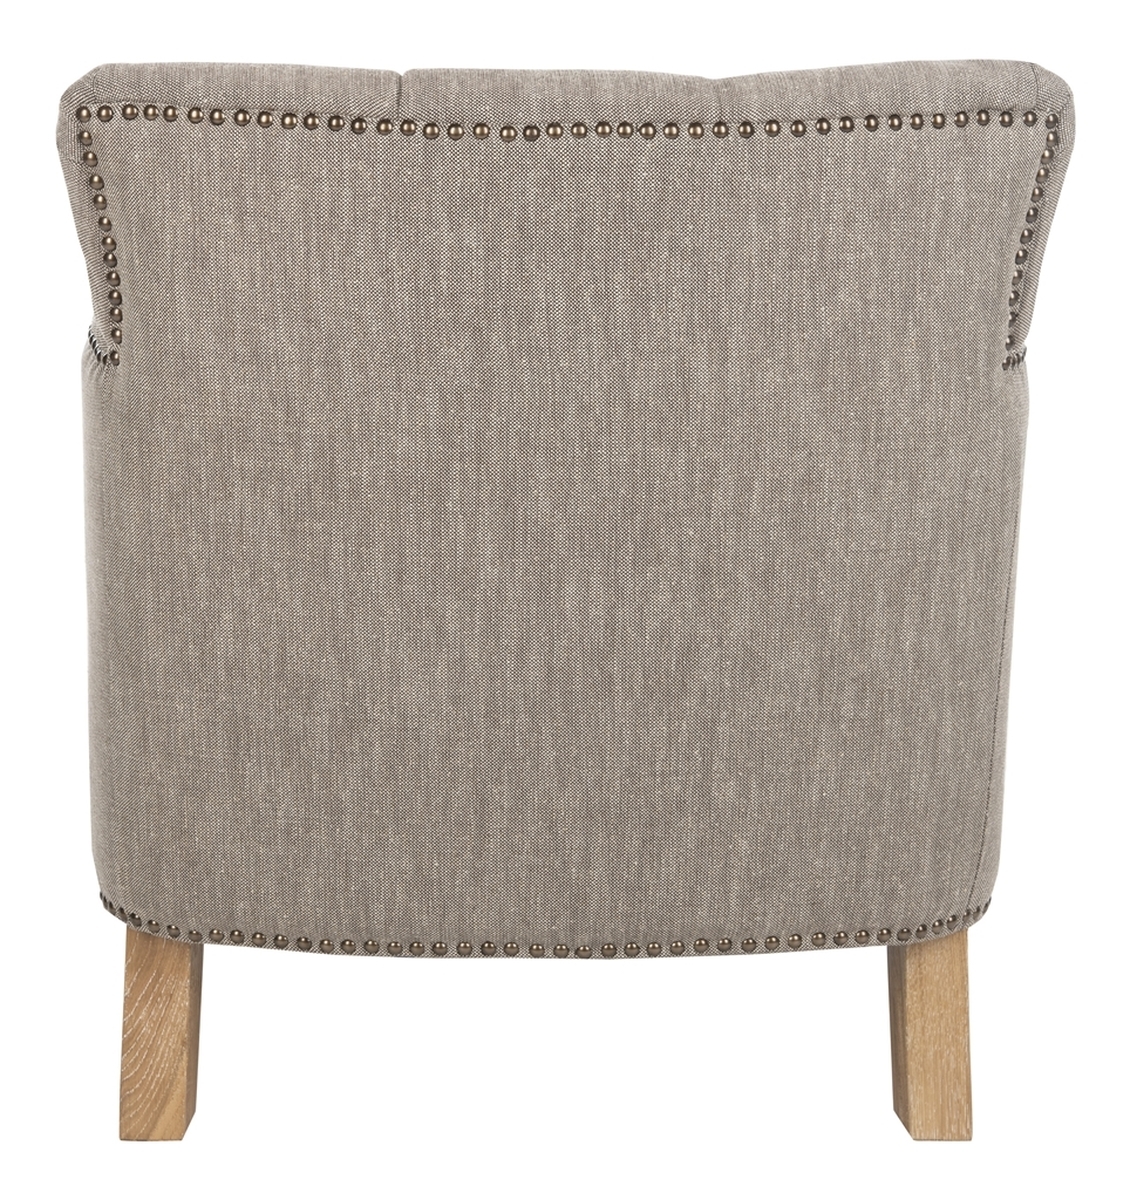 Colin Tufted Club Chair - Taupe/White Wash - Arlo Home - Image 5